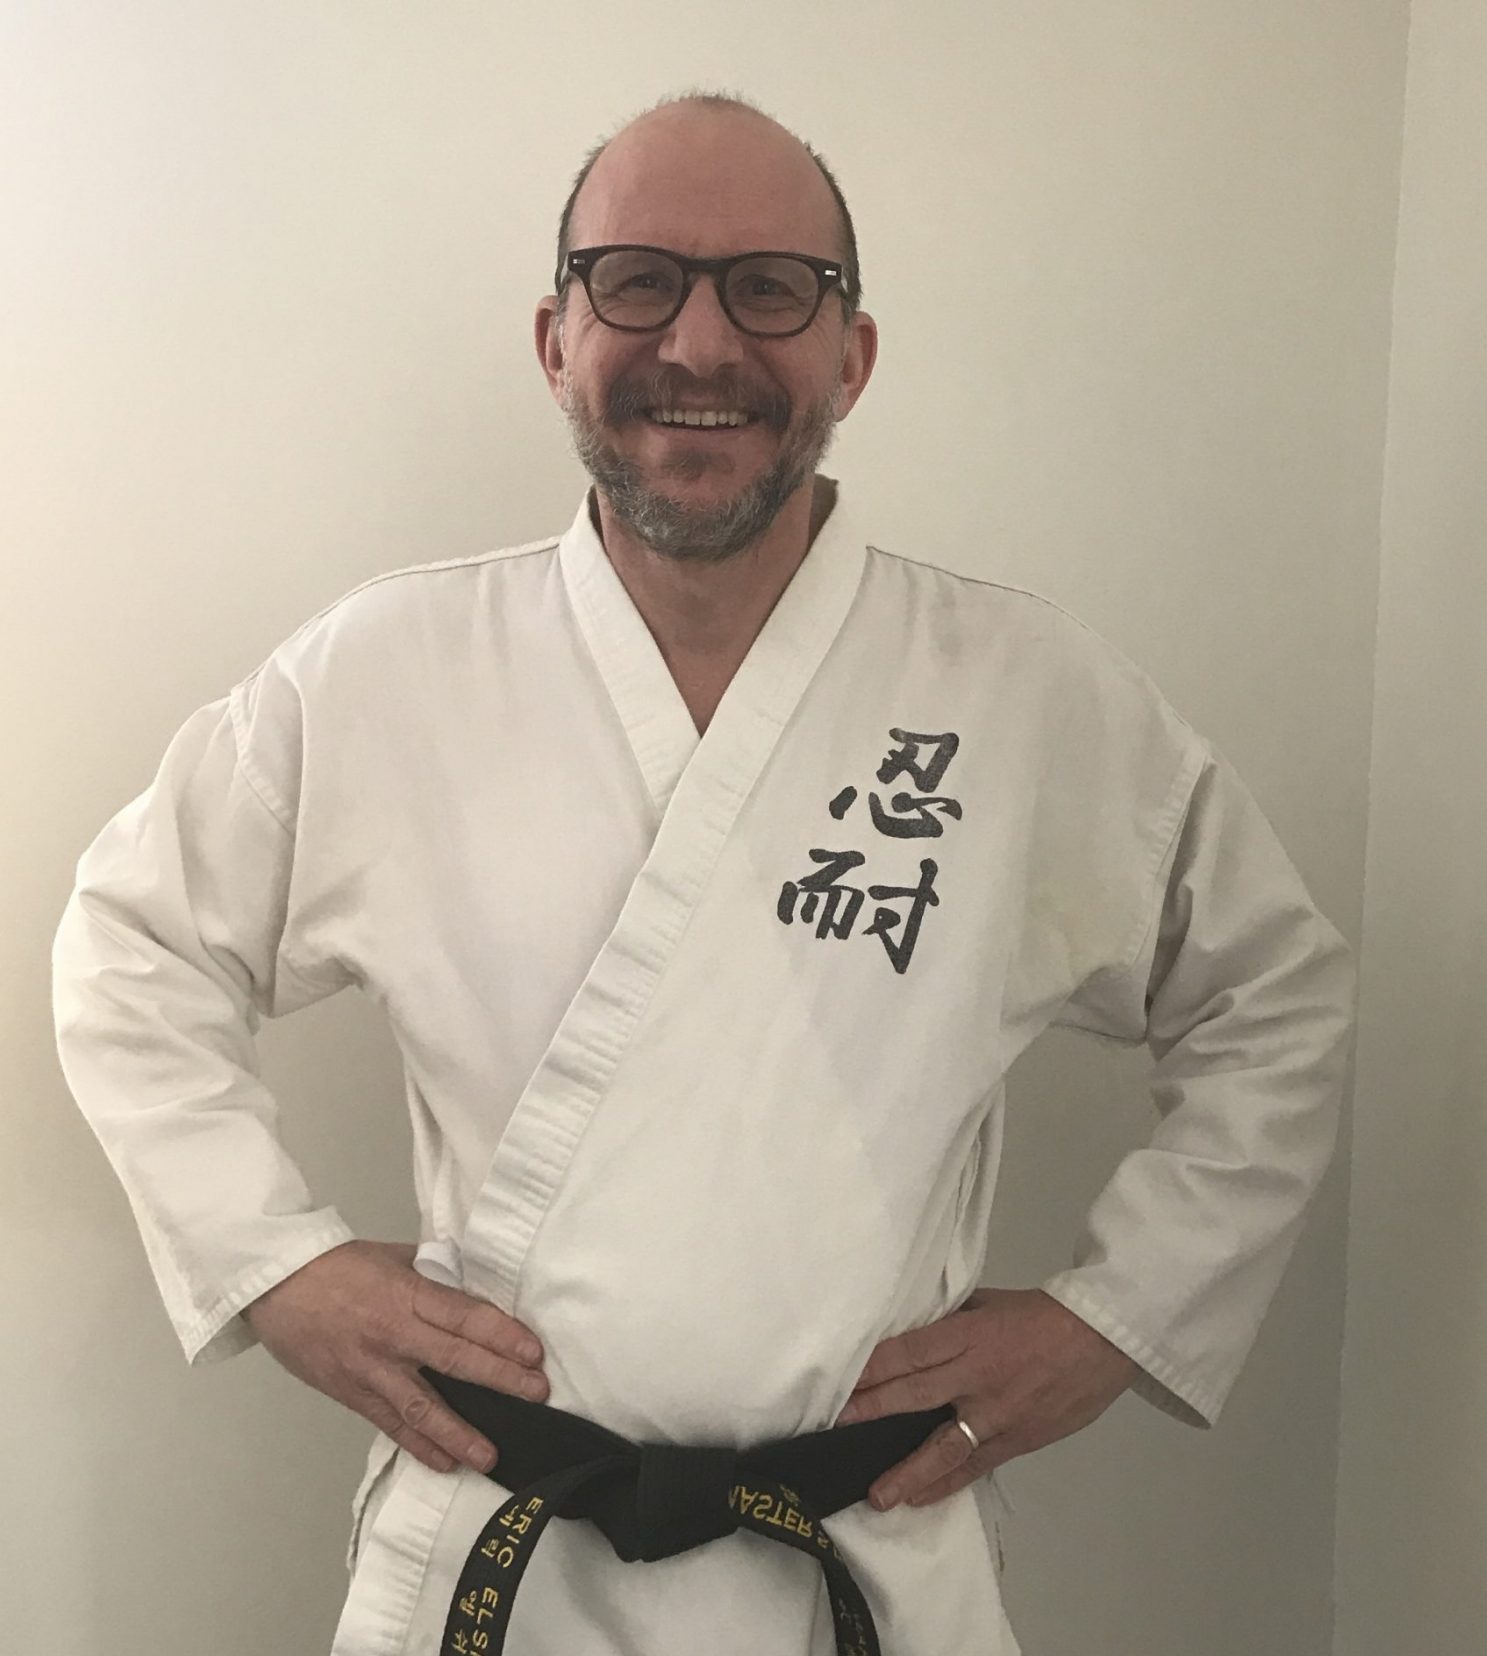 The Spirit Of Martial Arts Dedication: An Instructor’s View